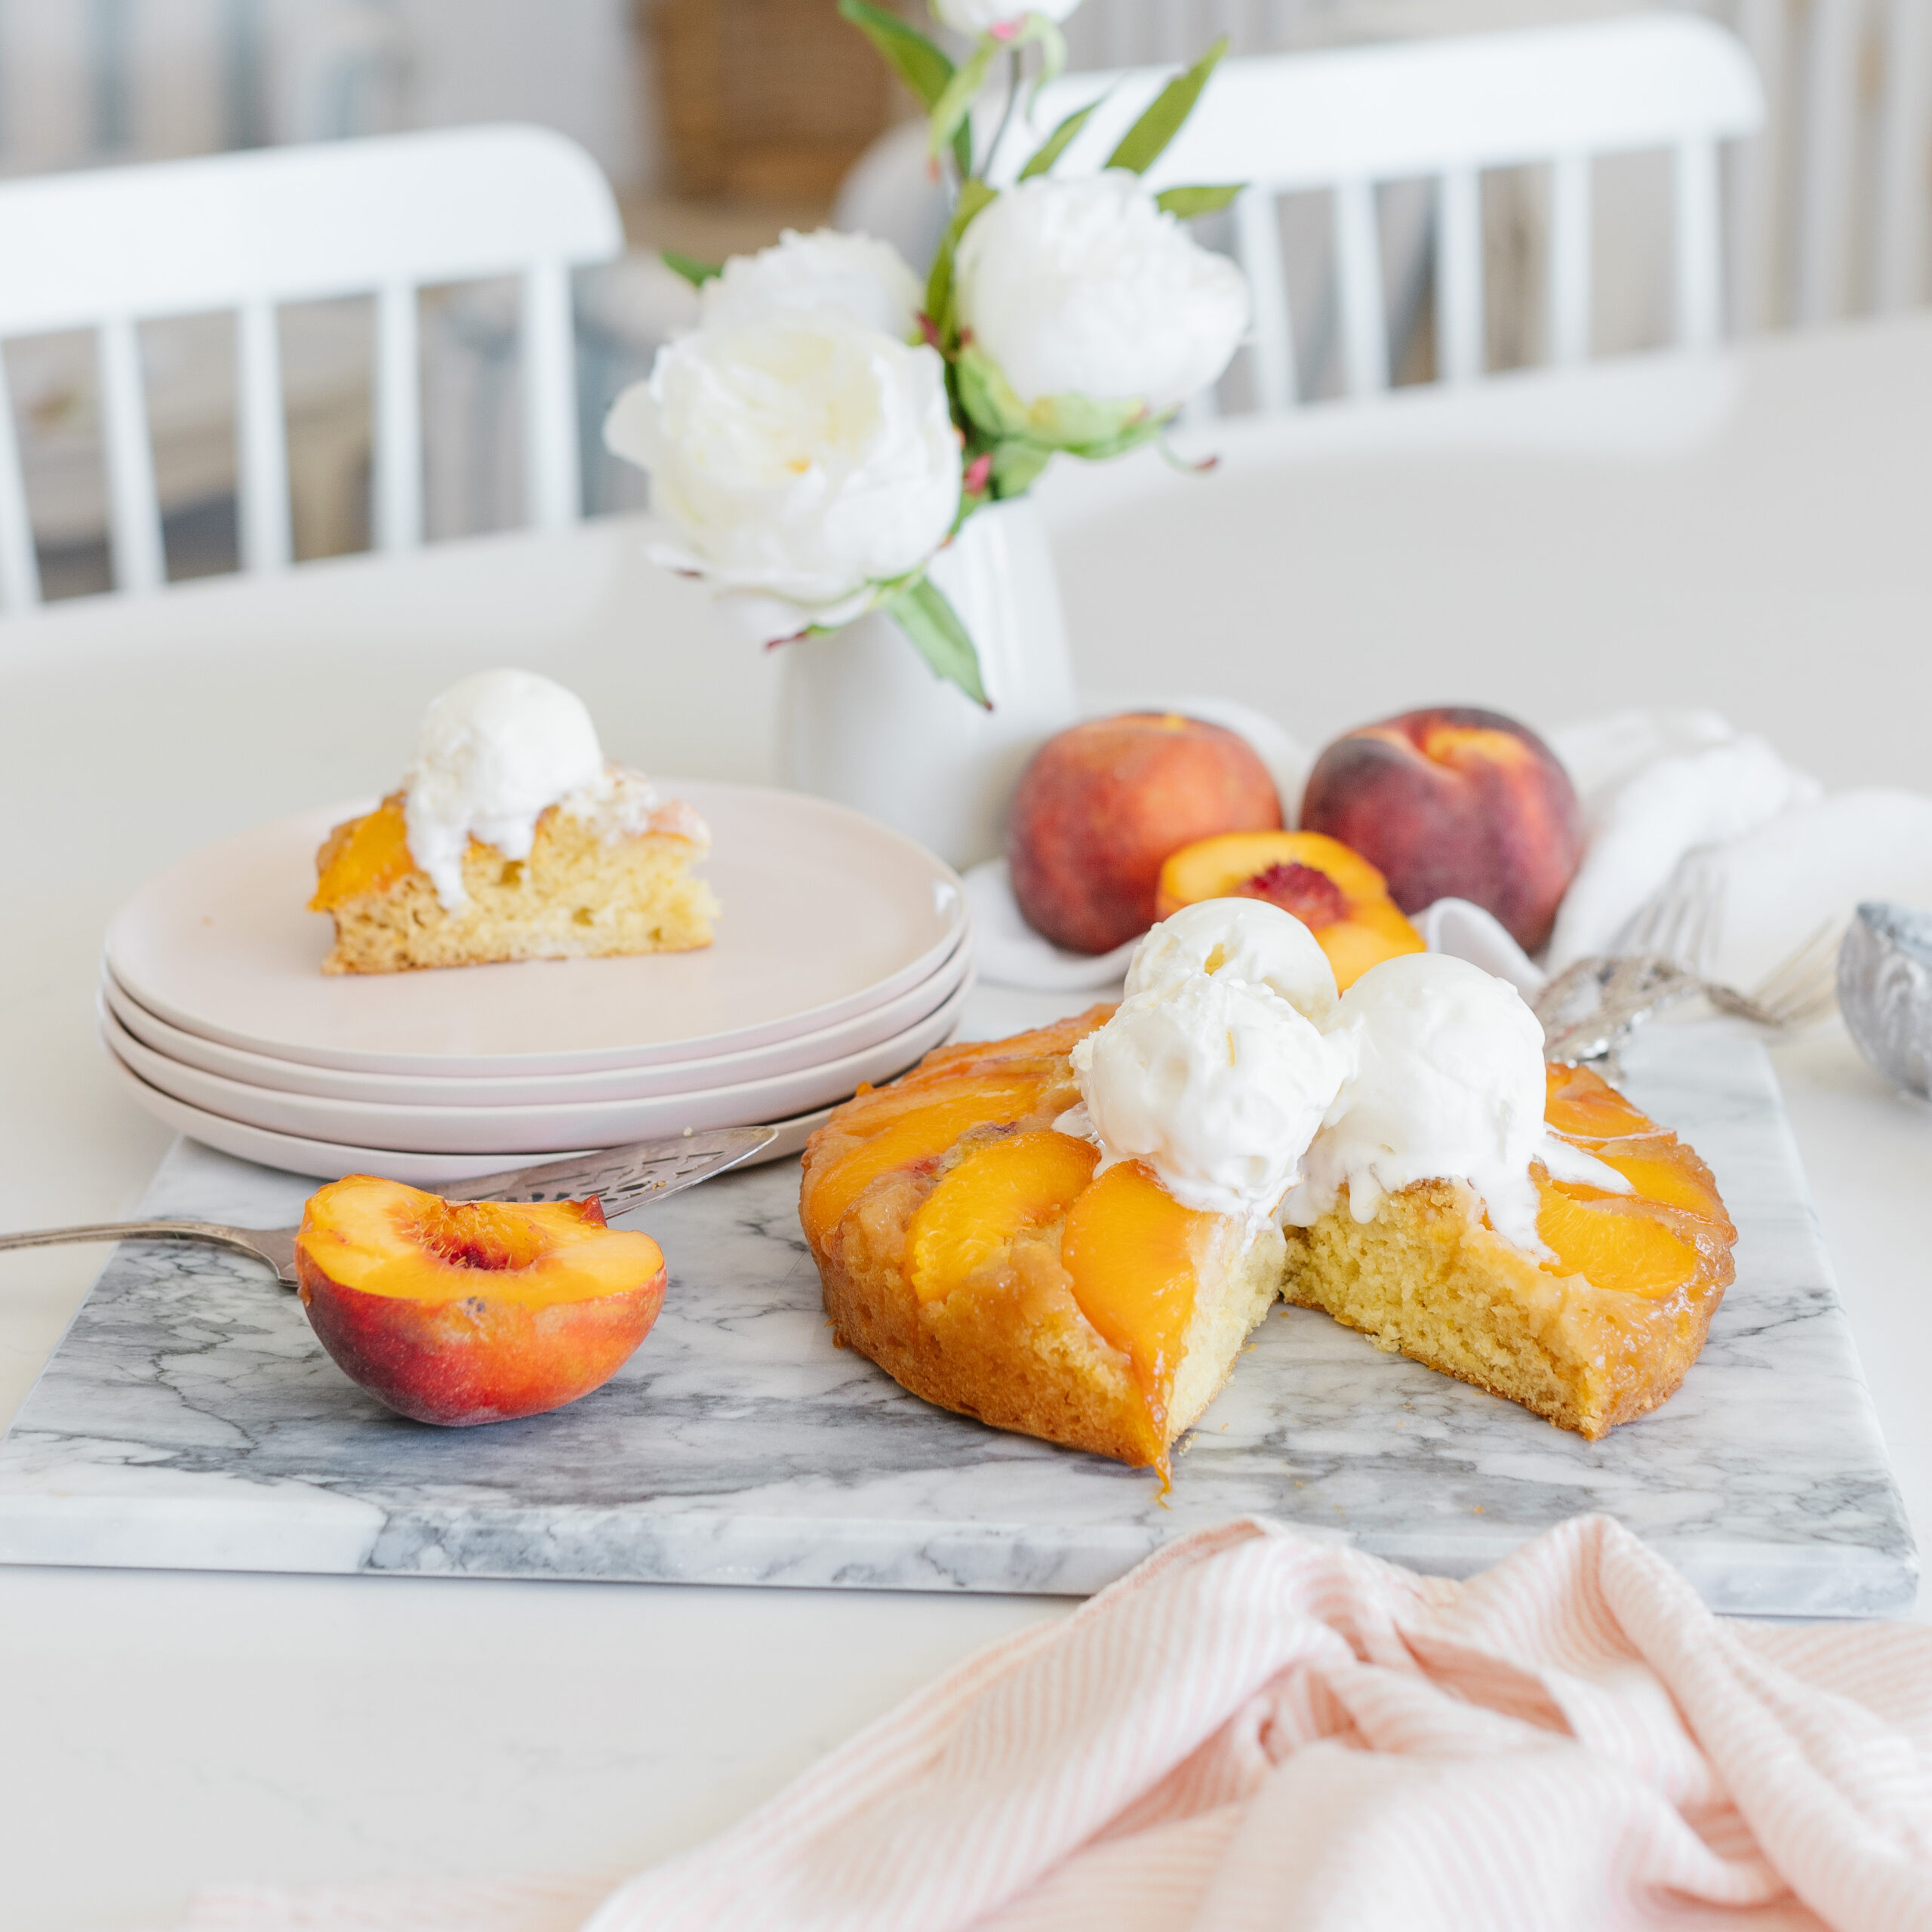 Summer Peach Upside Down Cake in Partnership with KitchenAid